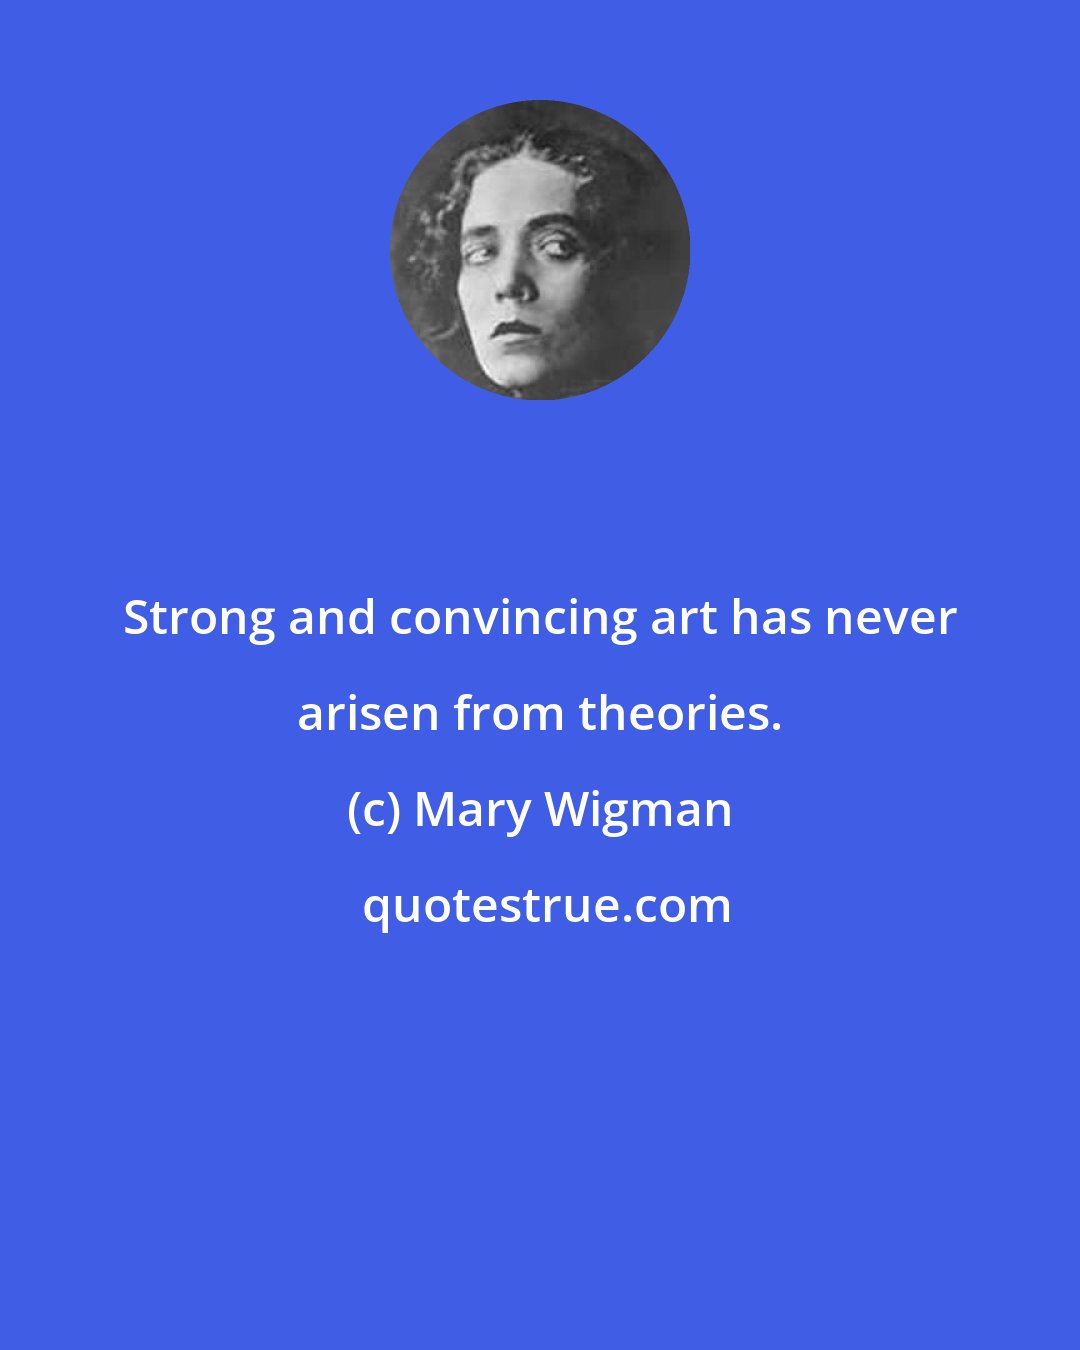 Mary Wigman: Strong and convincing art has never arisen from theories.